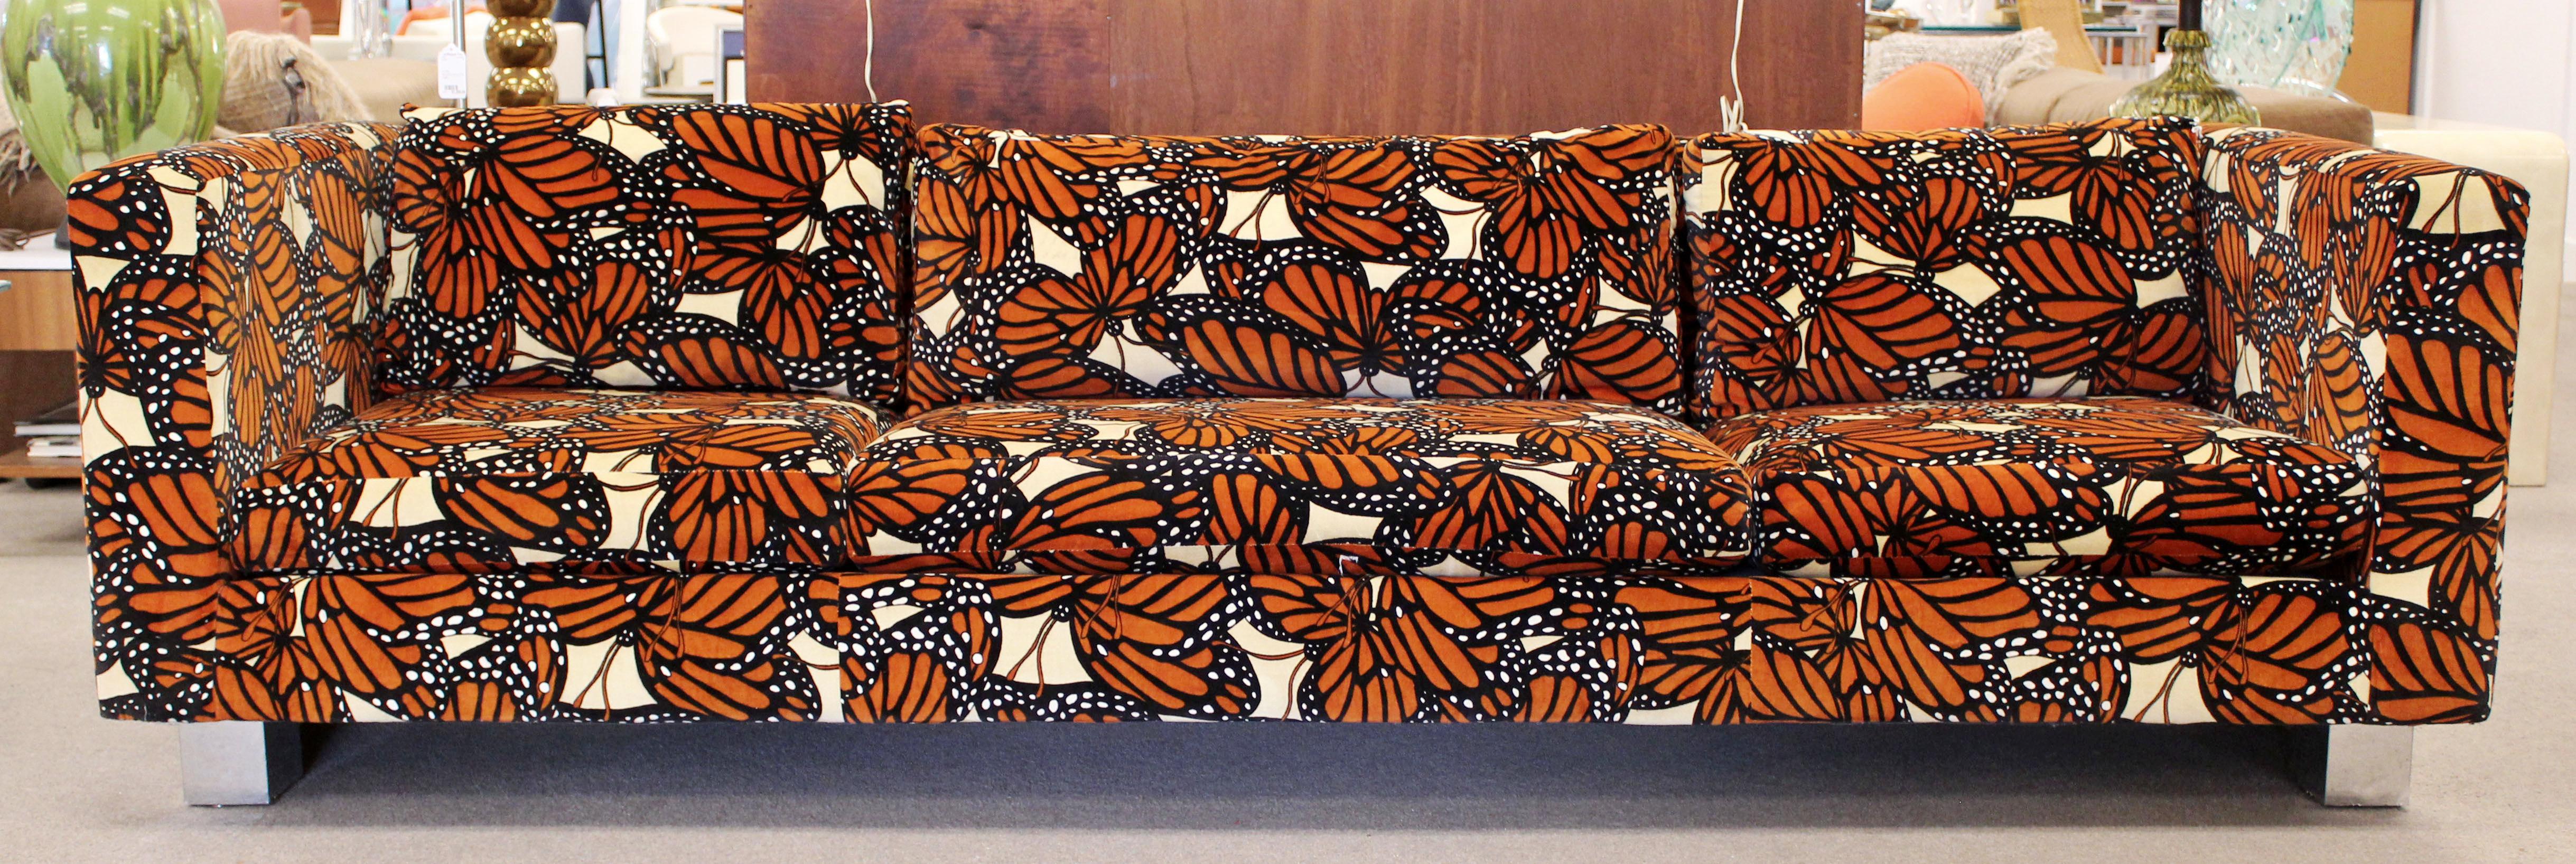 For your consideration is an incredible sofa with chrome accents, by Milo Baughman, with a rare Jack Lenor Larsen monarch butterfly fabric, circa 1970s. In excellent condition. The dimensions are 96